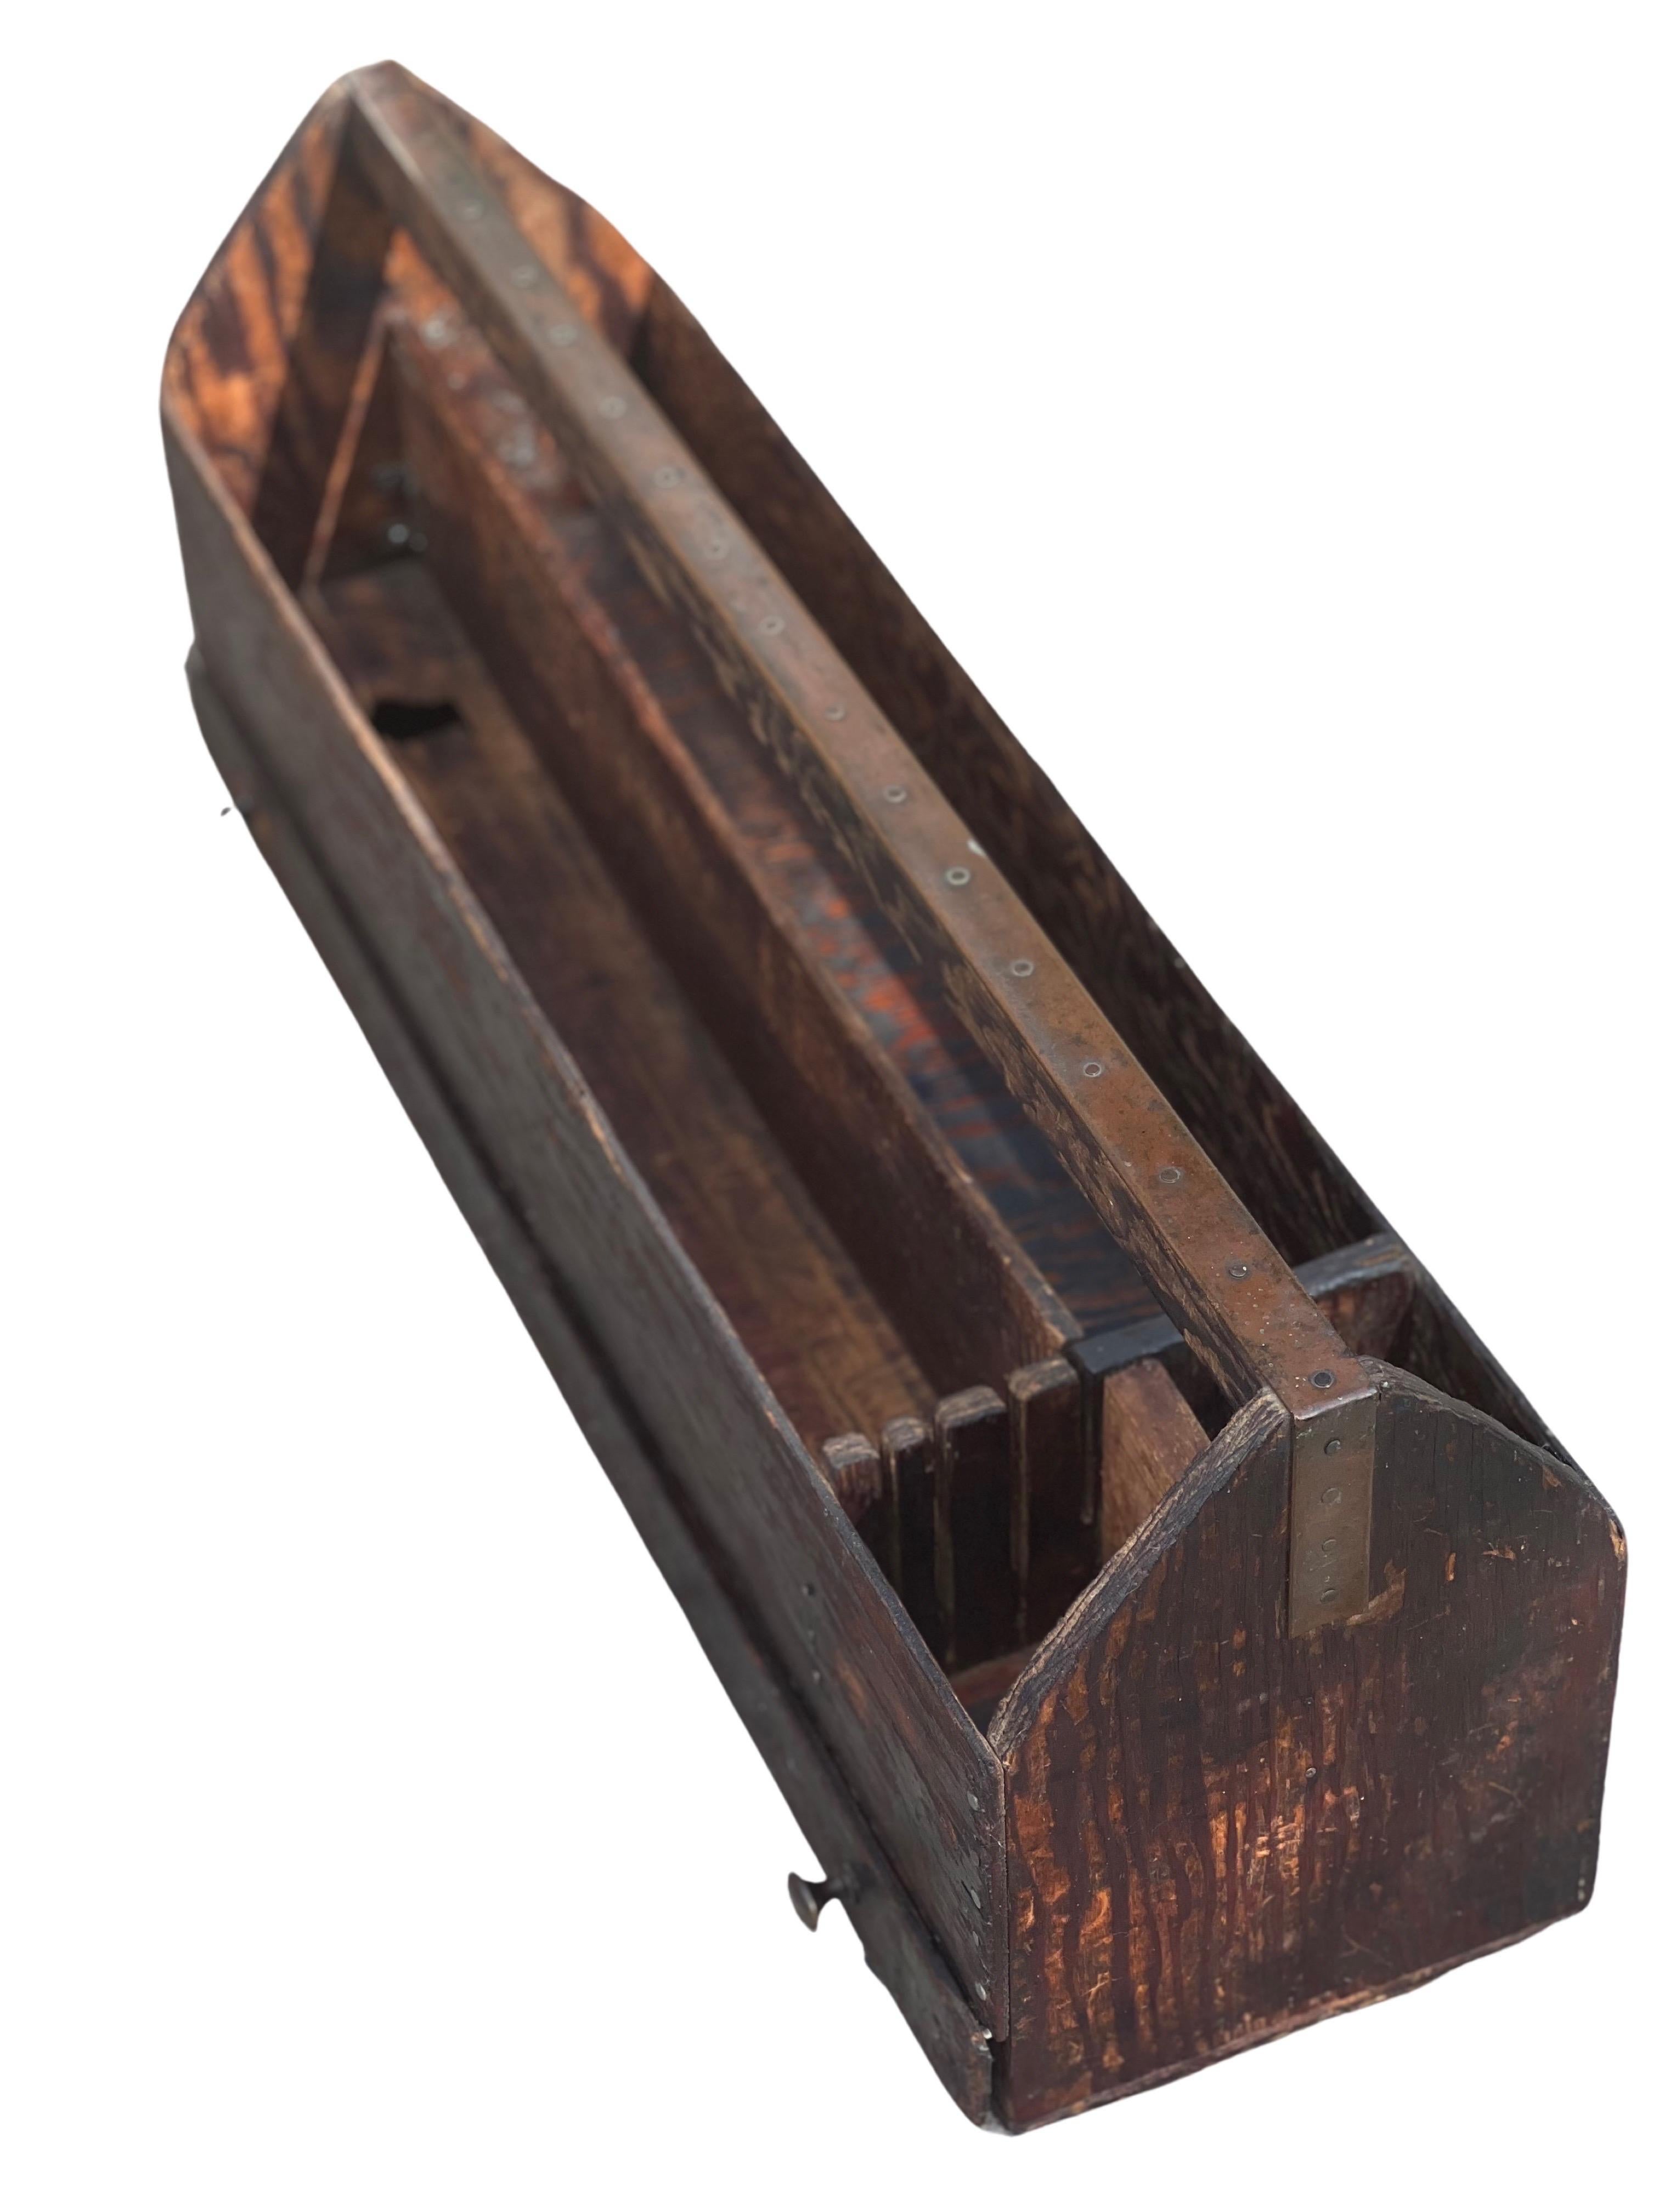 Hand-Crafted Antique Handcrafted Primitive Pine Tool Carrier or All-Purpose Caddy with Drawer For Sale